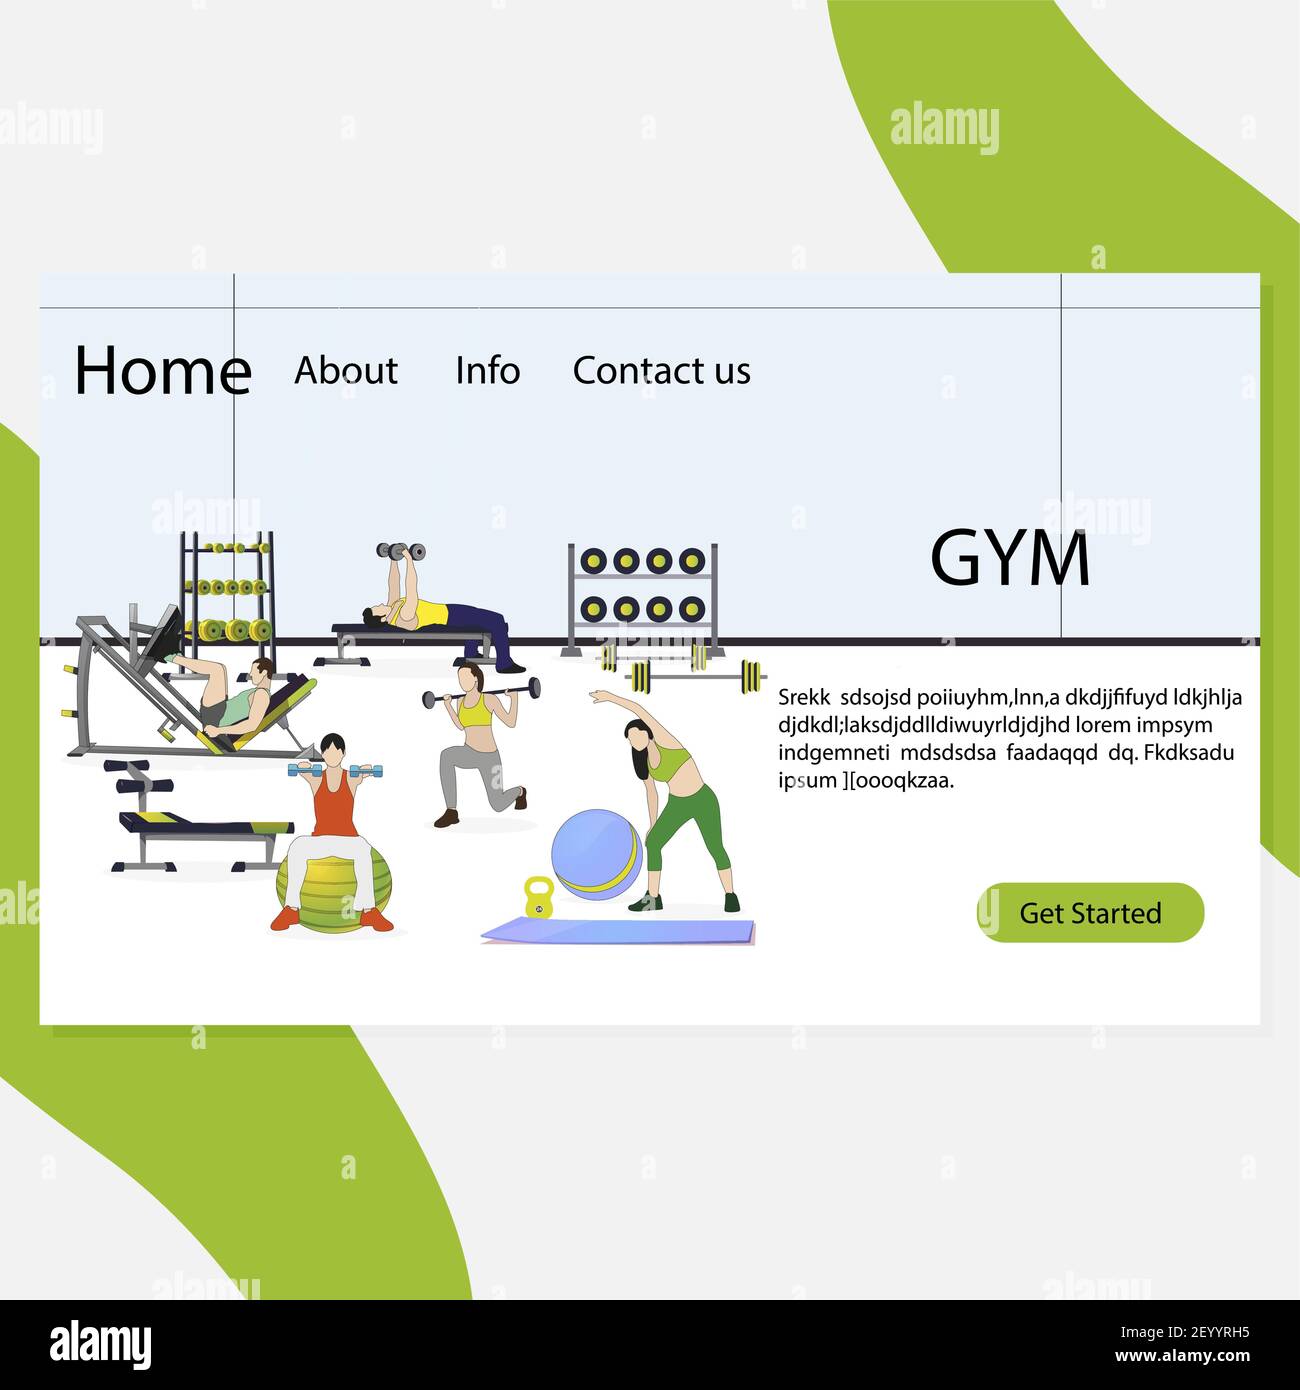 Gym landing page. Vector sport training to health, fitness lifestyle cartoon, body activity illustration, interior gym with sport equipment for workou Stock Vector